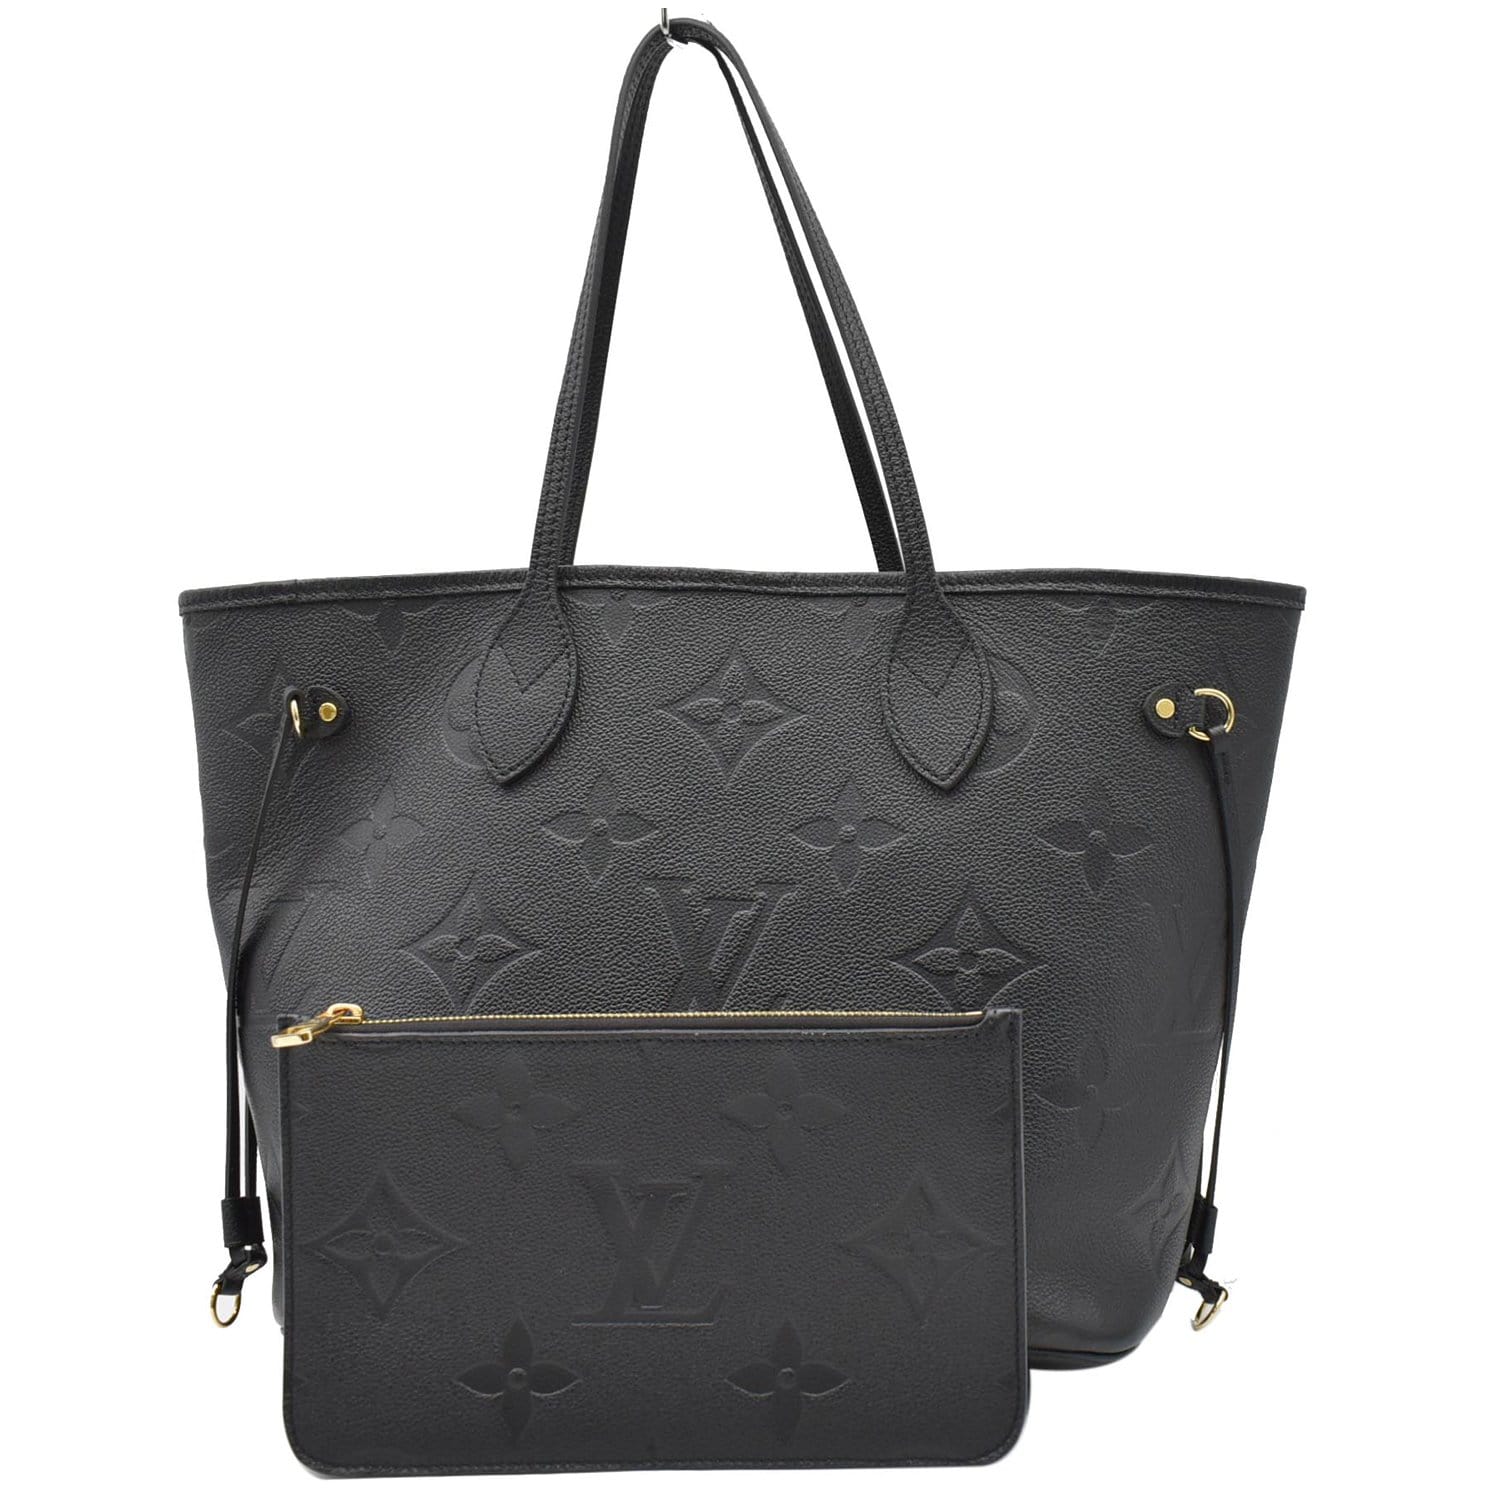 LOUIS VUITTON NEVERFULL MM EMPREINTE LEATHER / LV bag in detail